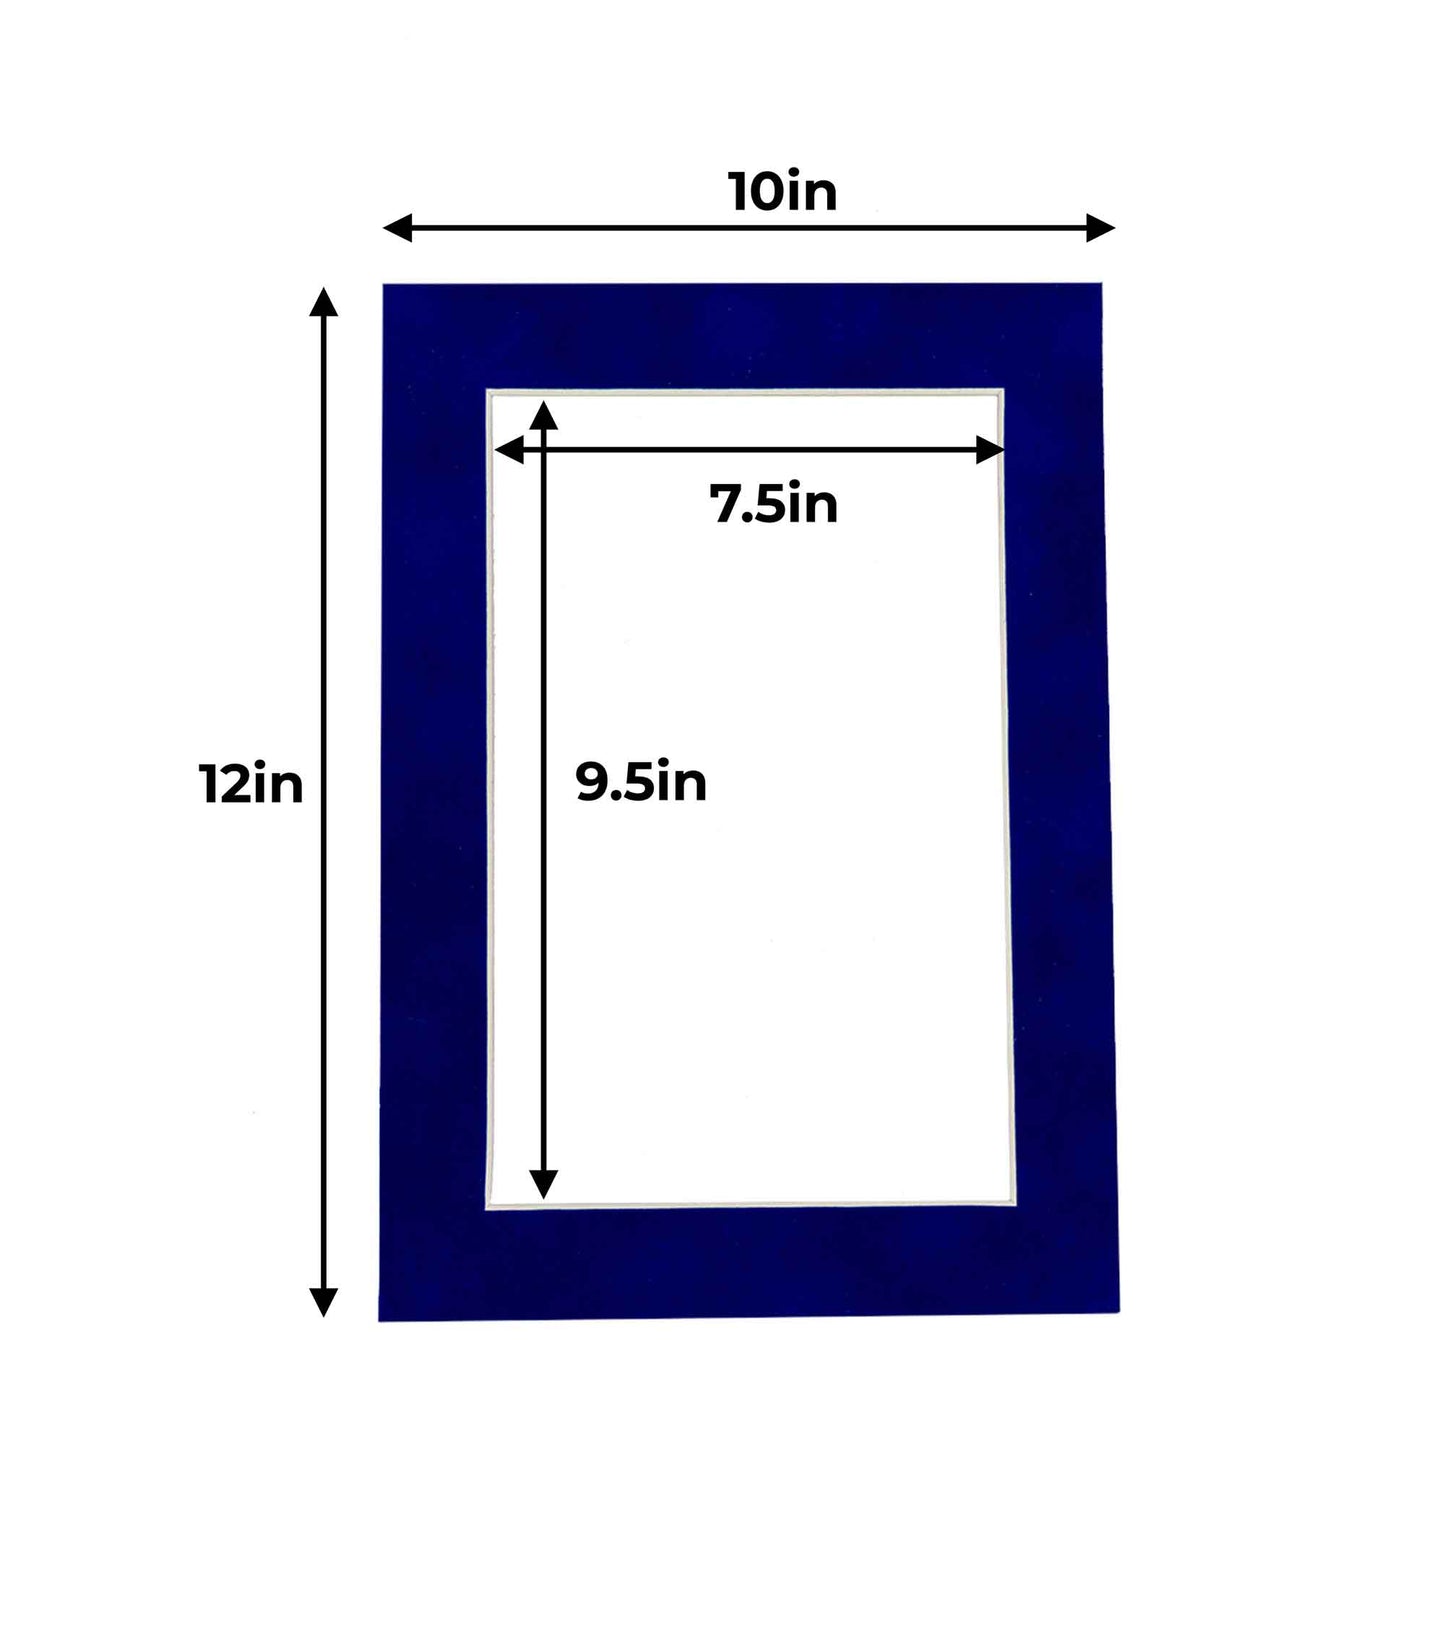 Royal Blue Suede Precut Acid-Free Matboard Set with Clear Bag & Backing